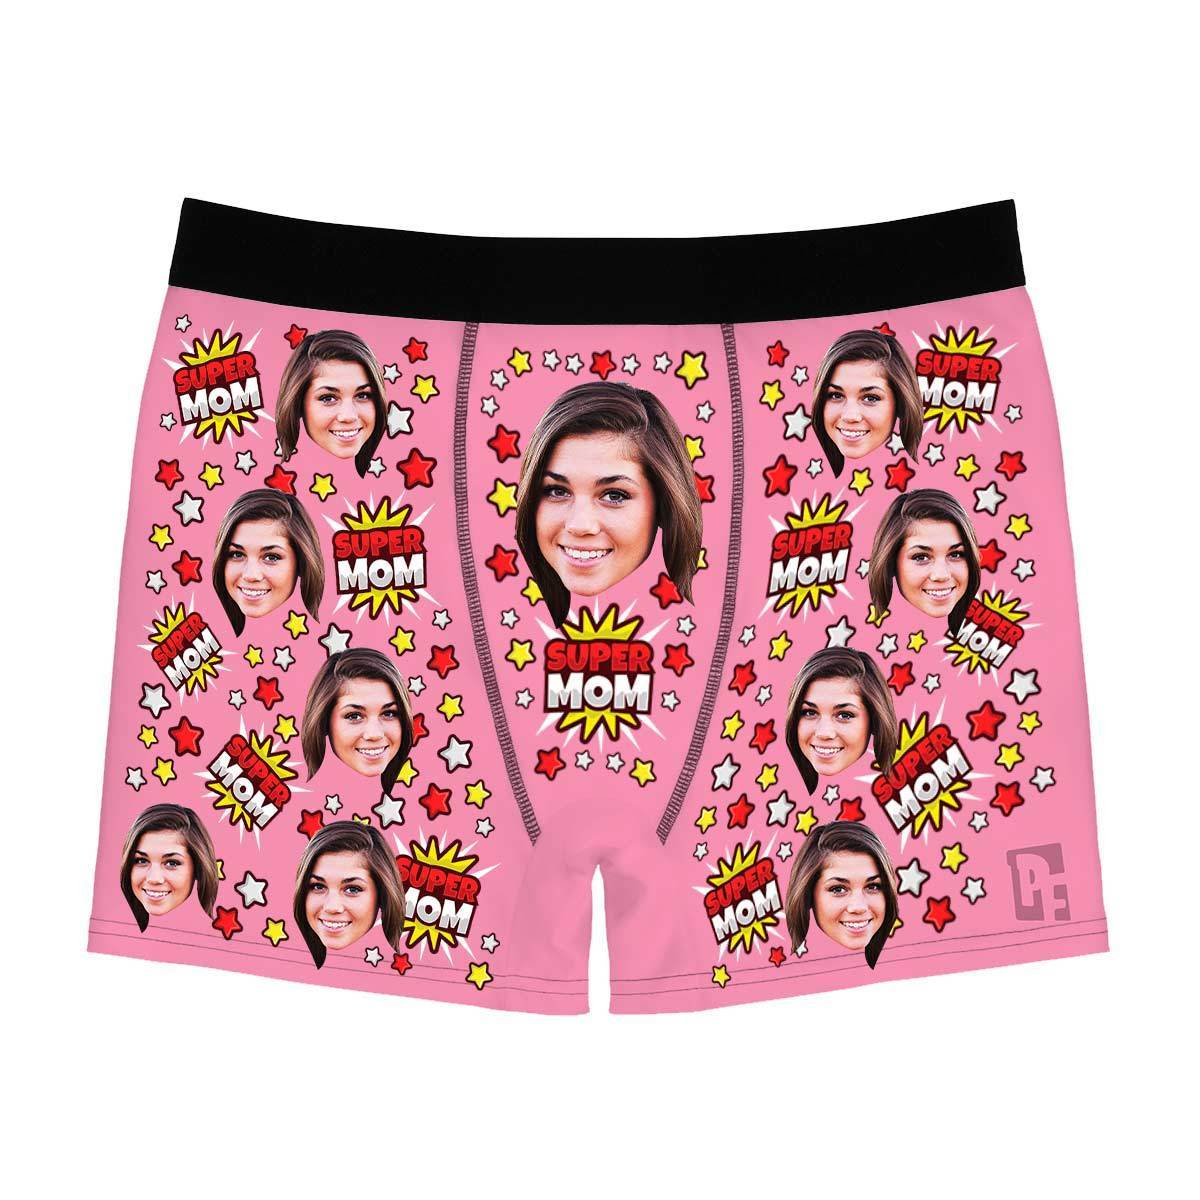 Pink Super mom men's boxer briefs personalized with photo printed on them